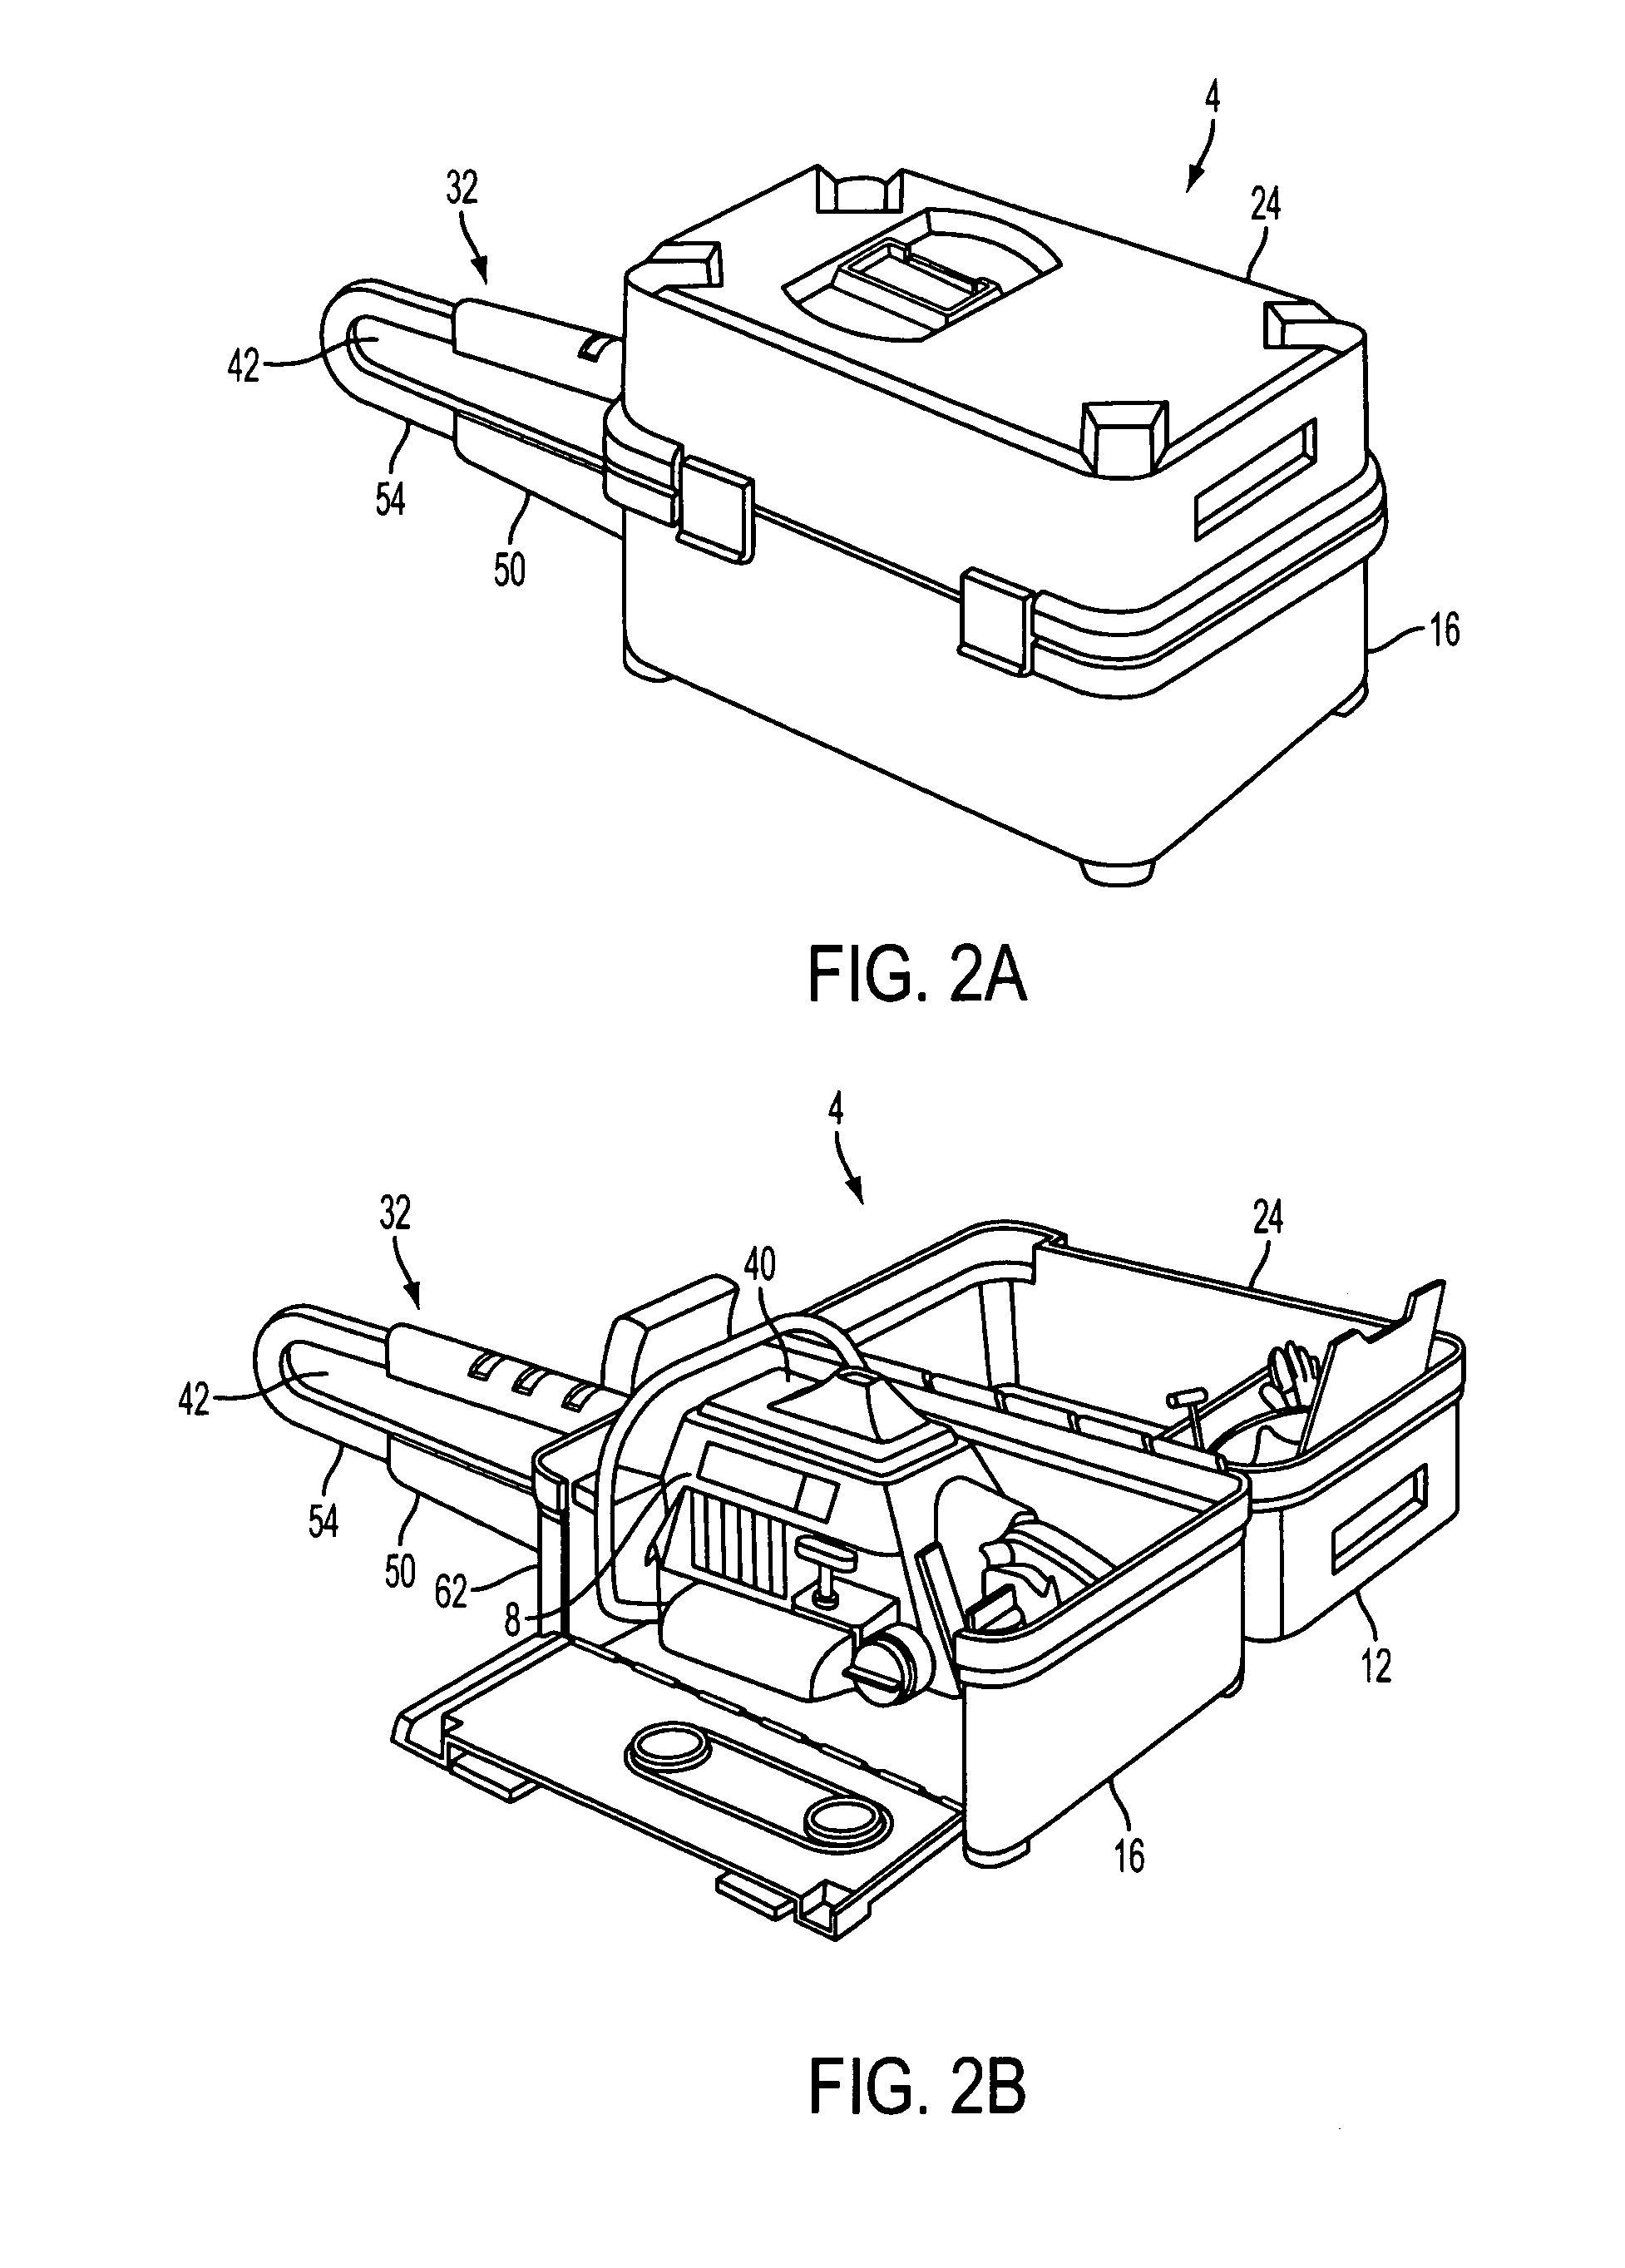 Tool case having scabbard with adjustable length